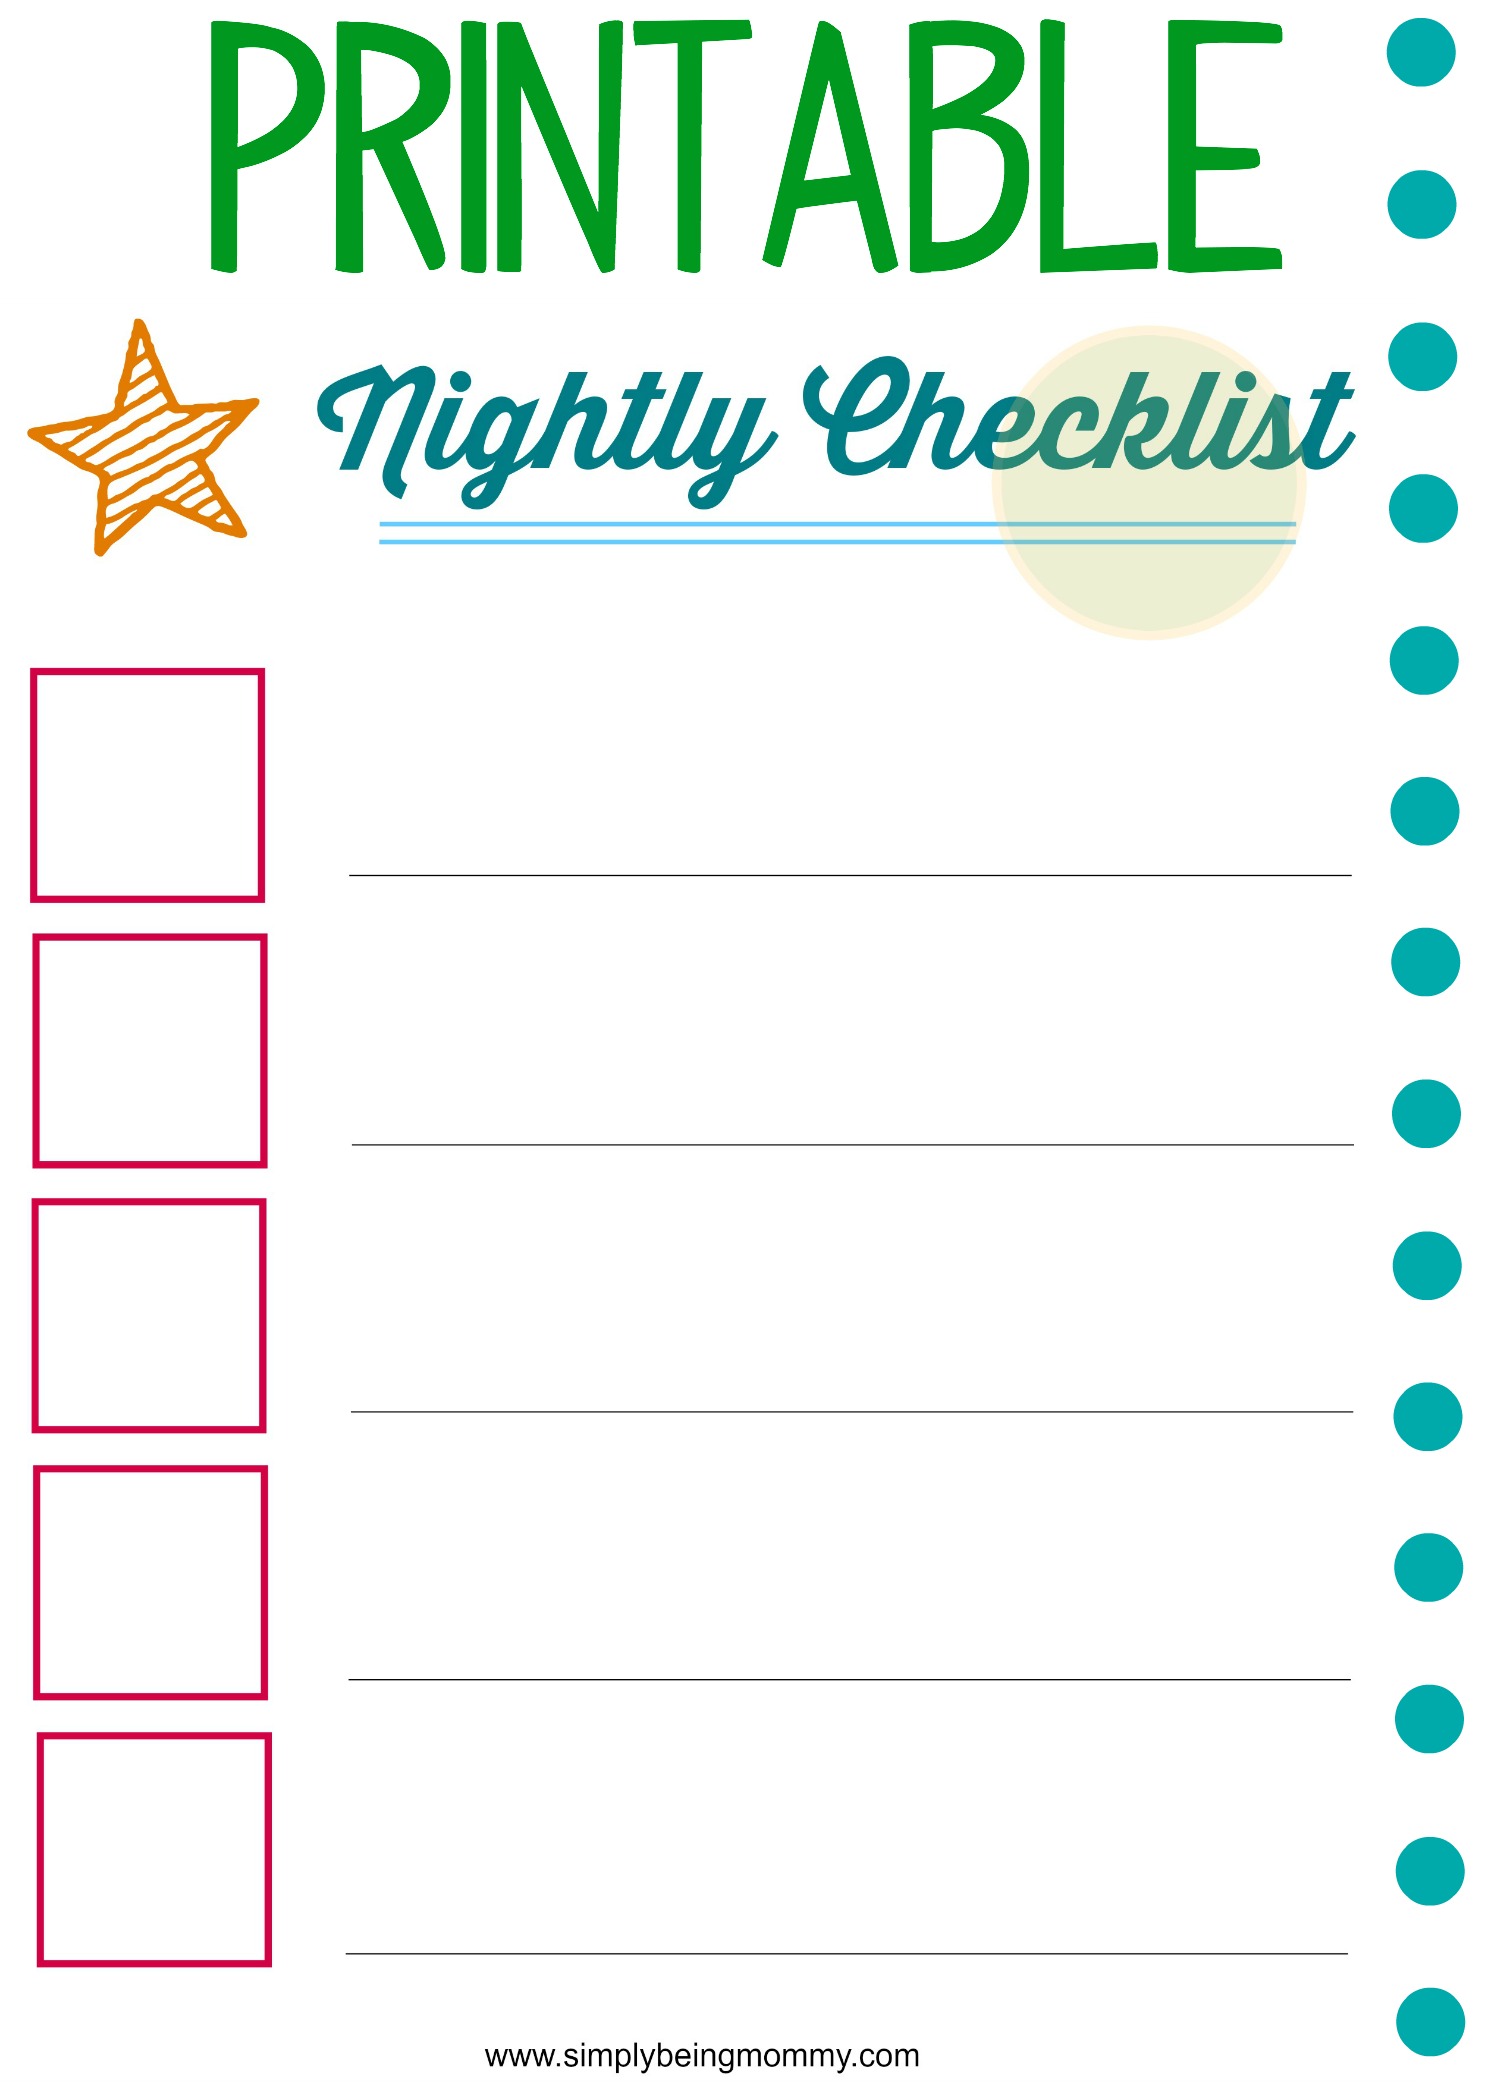 printable-nightly-checklist-for-children-simply-being-mommy